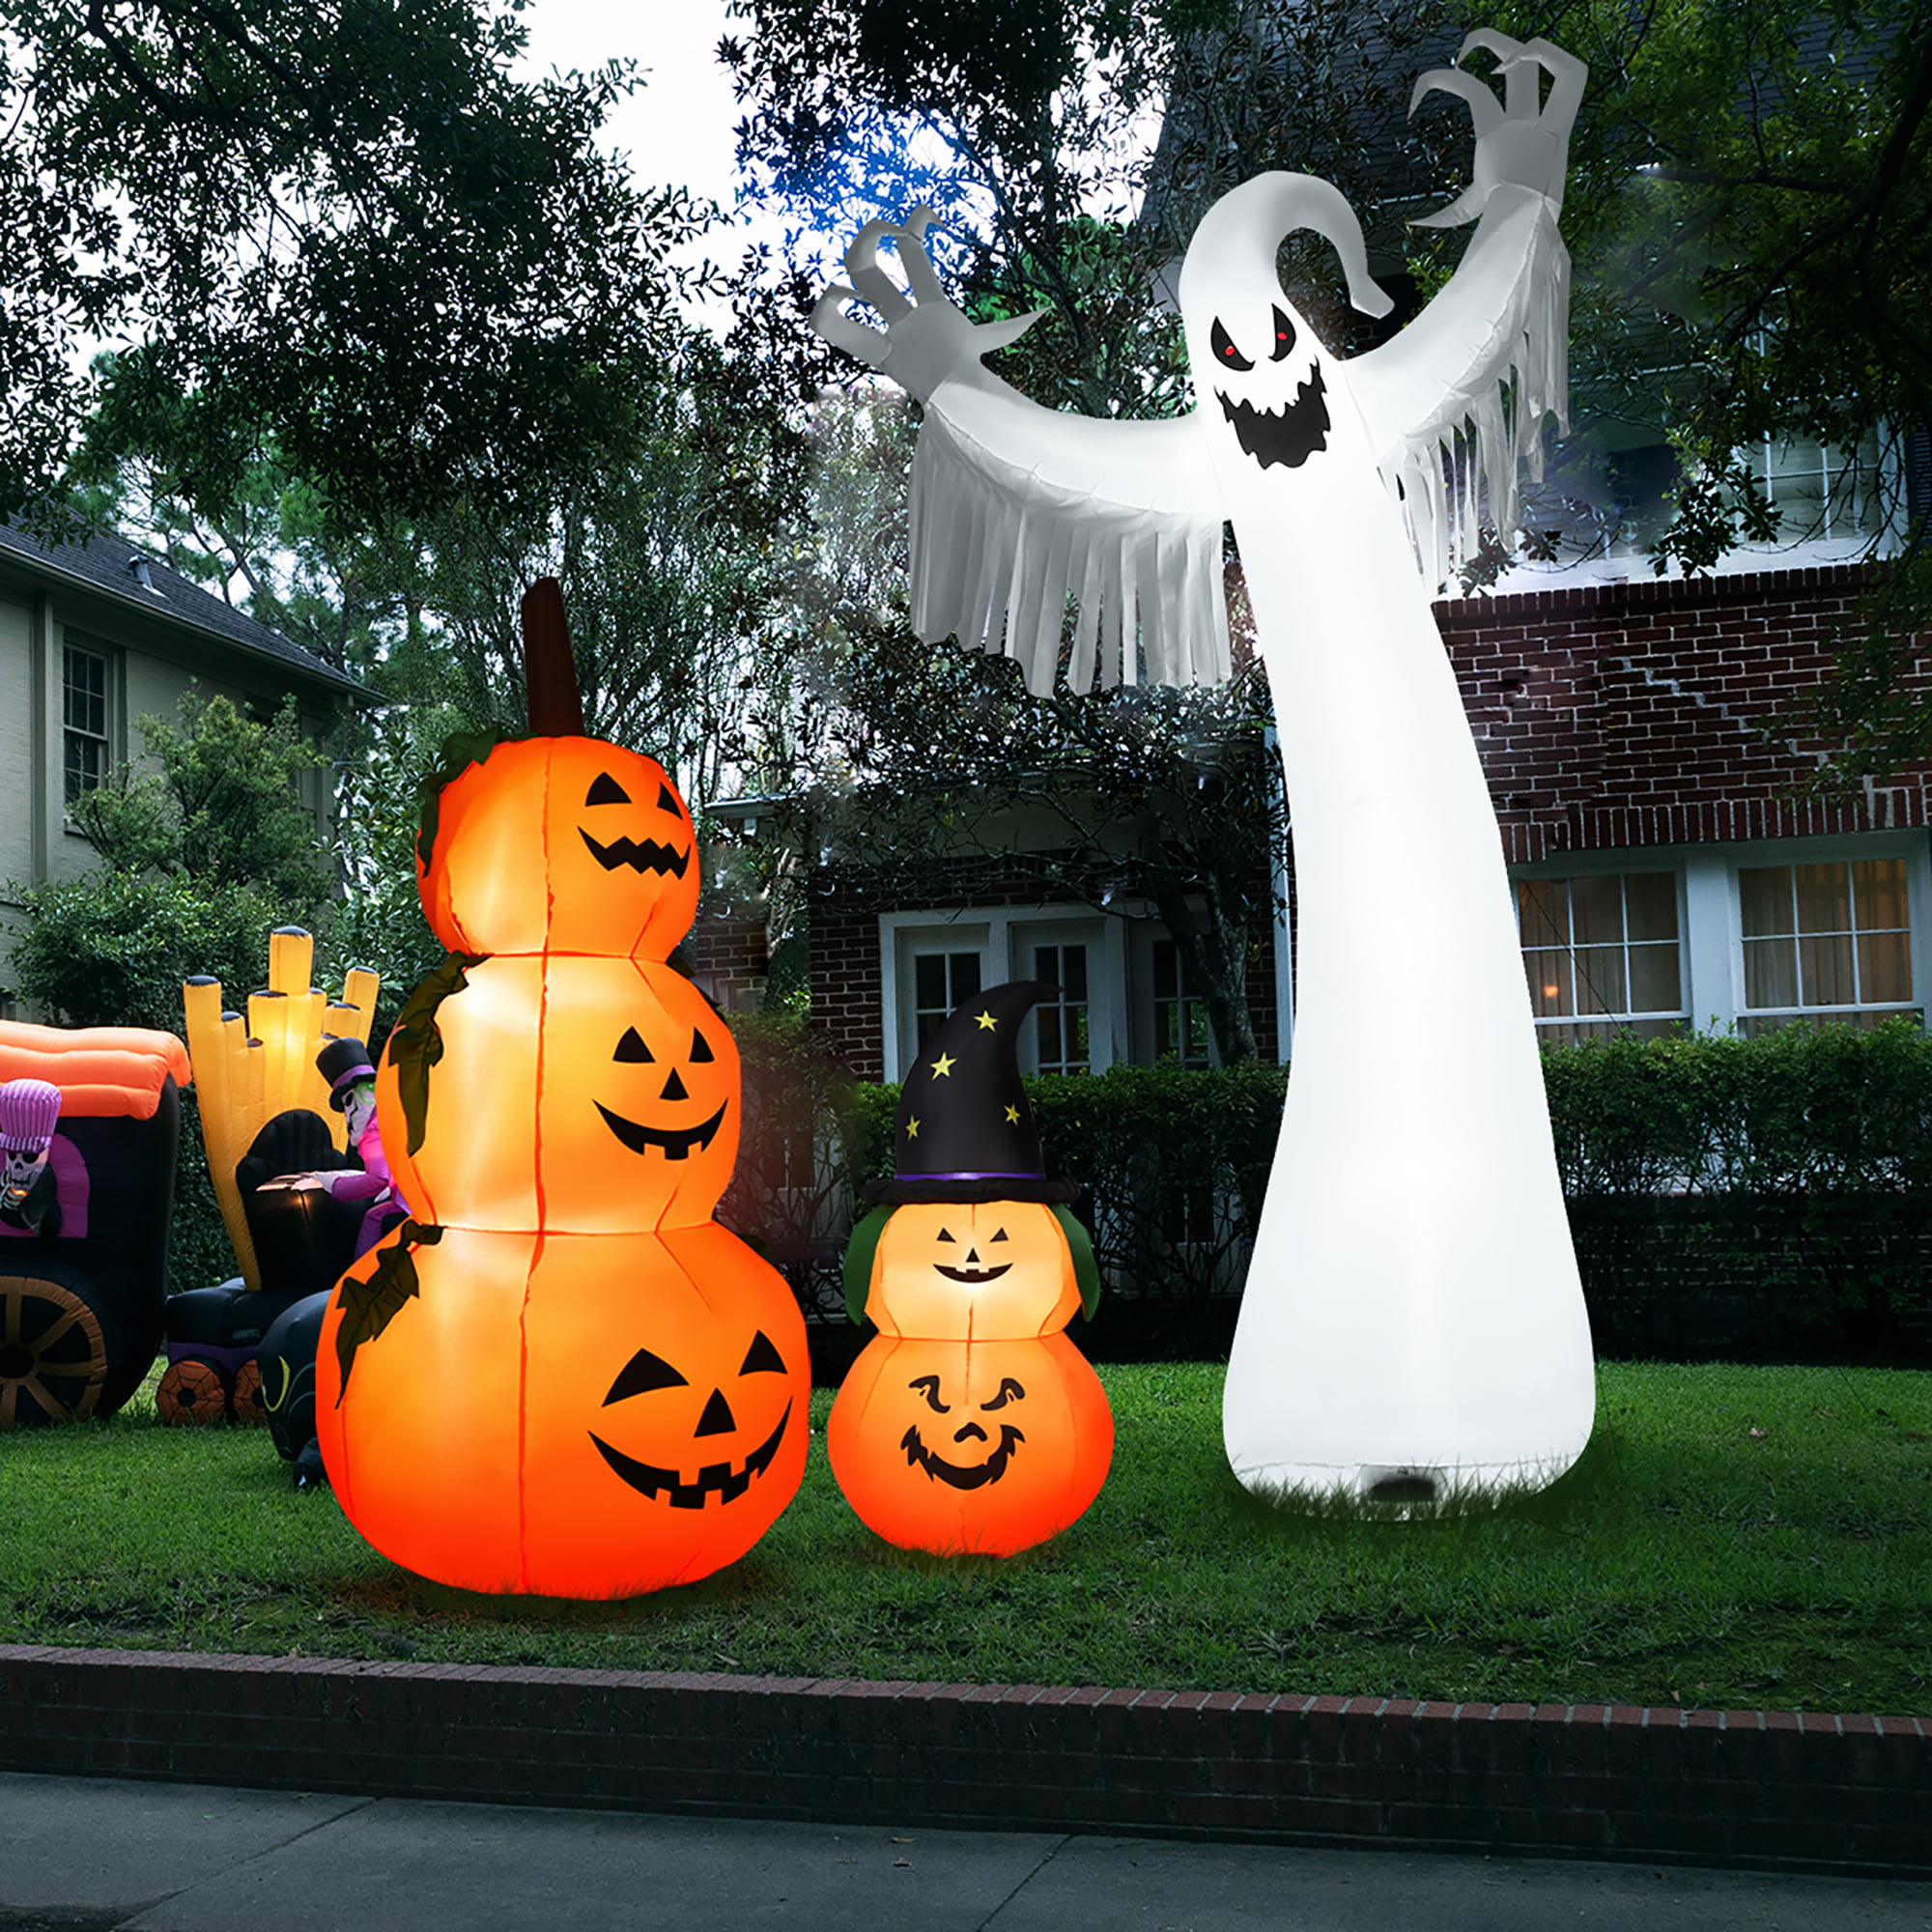 Tall Spooky Colorful Flashing Led Blow Up Cool Garden Lawn Yard Halloween Party Decorations Outdoor Indoor 12 Feet Halloween Giant Ghost Inflatable with Scary Sound Infrared Voice Sensor Prompter